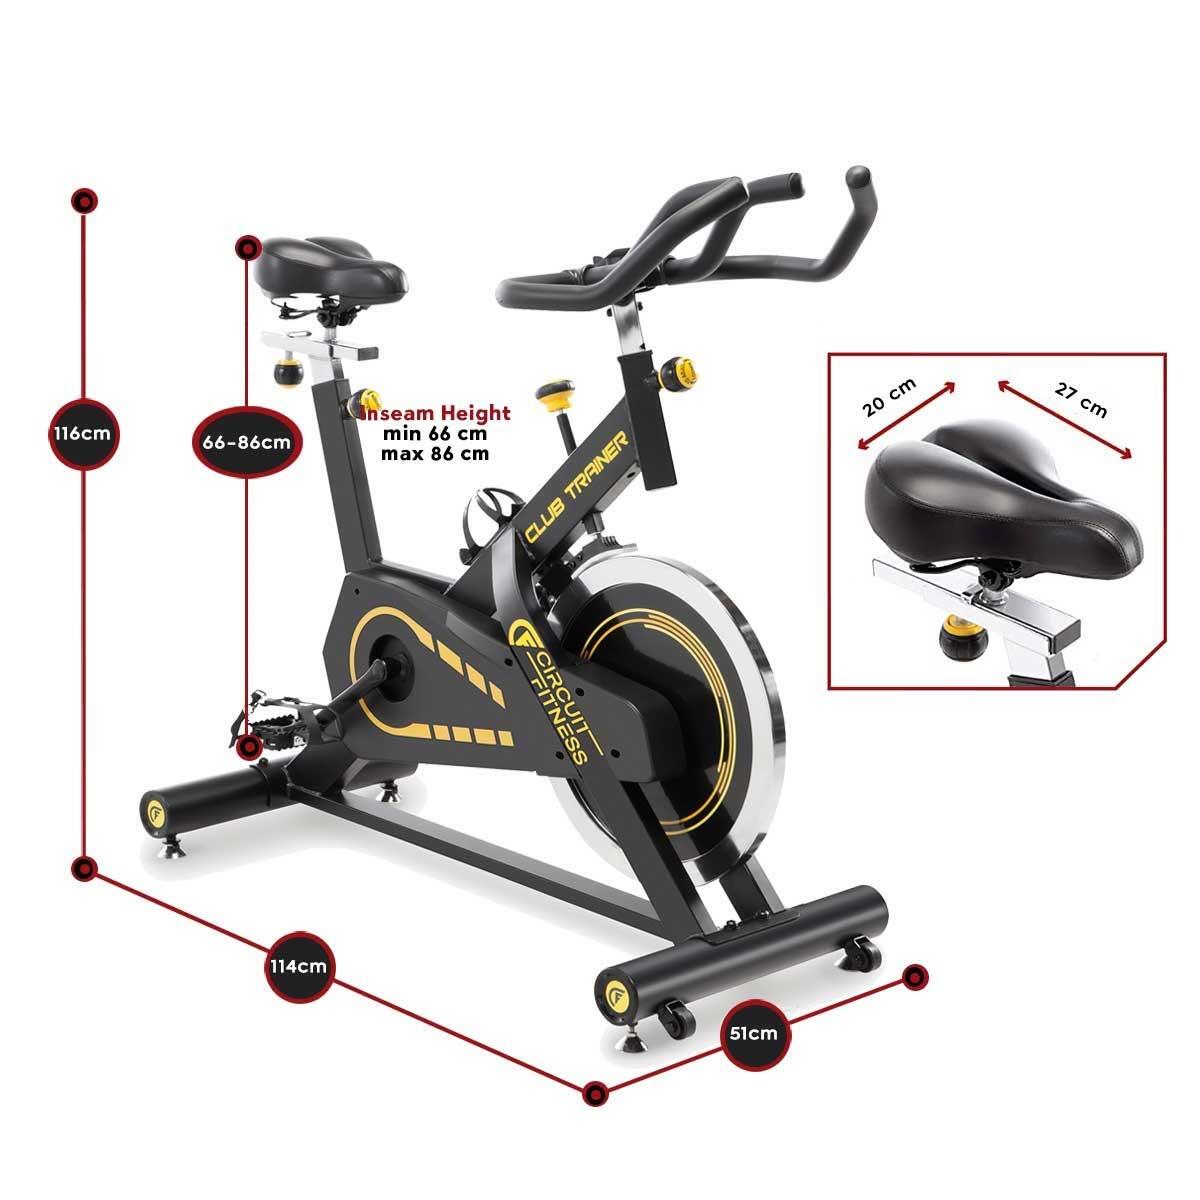 CIRCUIT FITNESS AMZ-955BK DELUXE CLUB REVOLUTION SPIN CYCLE YELLOW 7/7